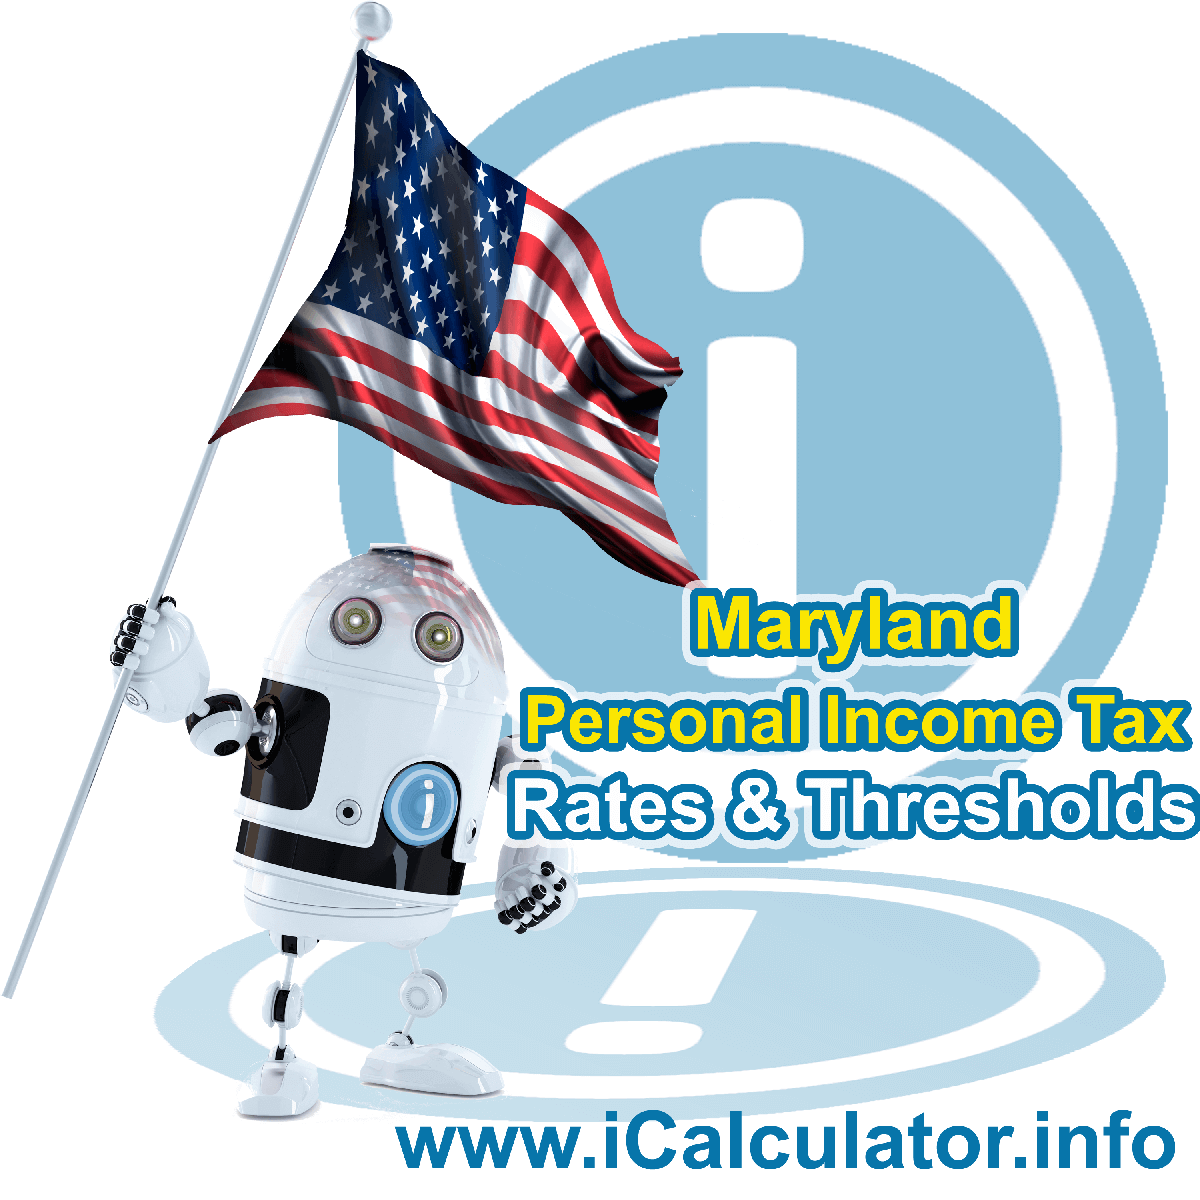 Maryland State Tax Tables 2022. This image displays details of the Maryland State Tax Tables for the 2022 tax return year which is provided in support of the 2022 US Tax Calculator